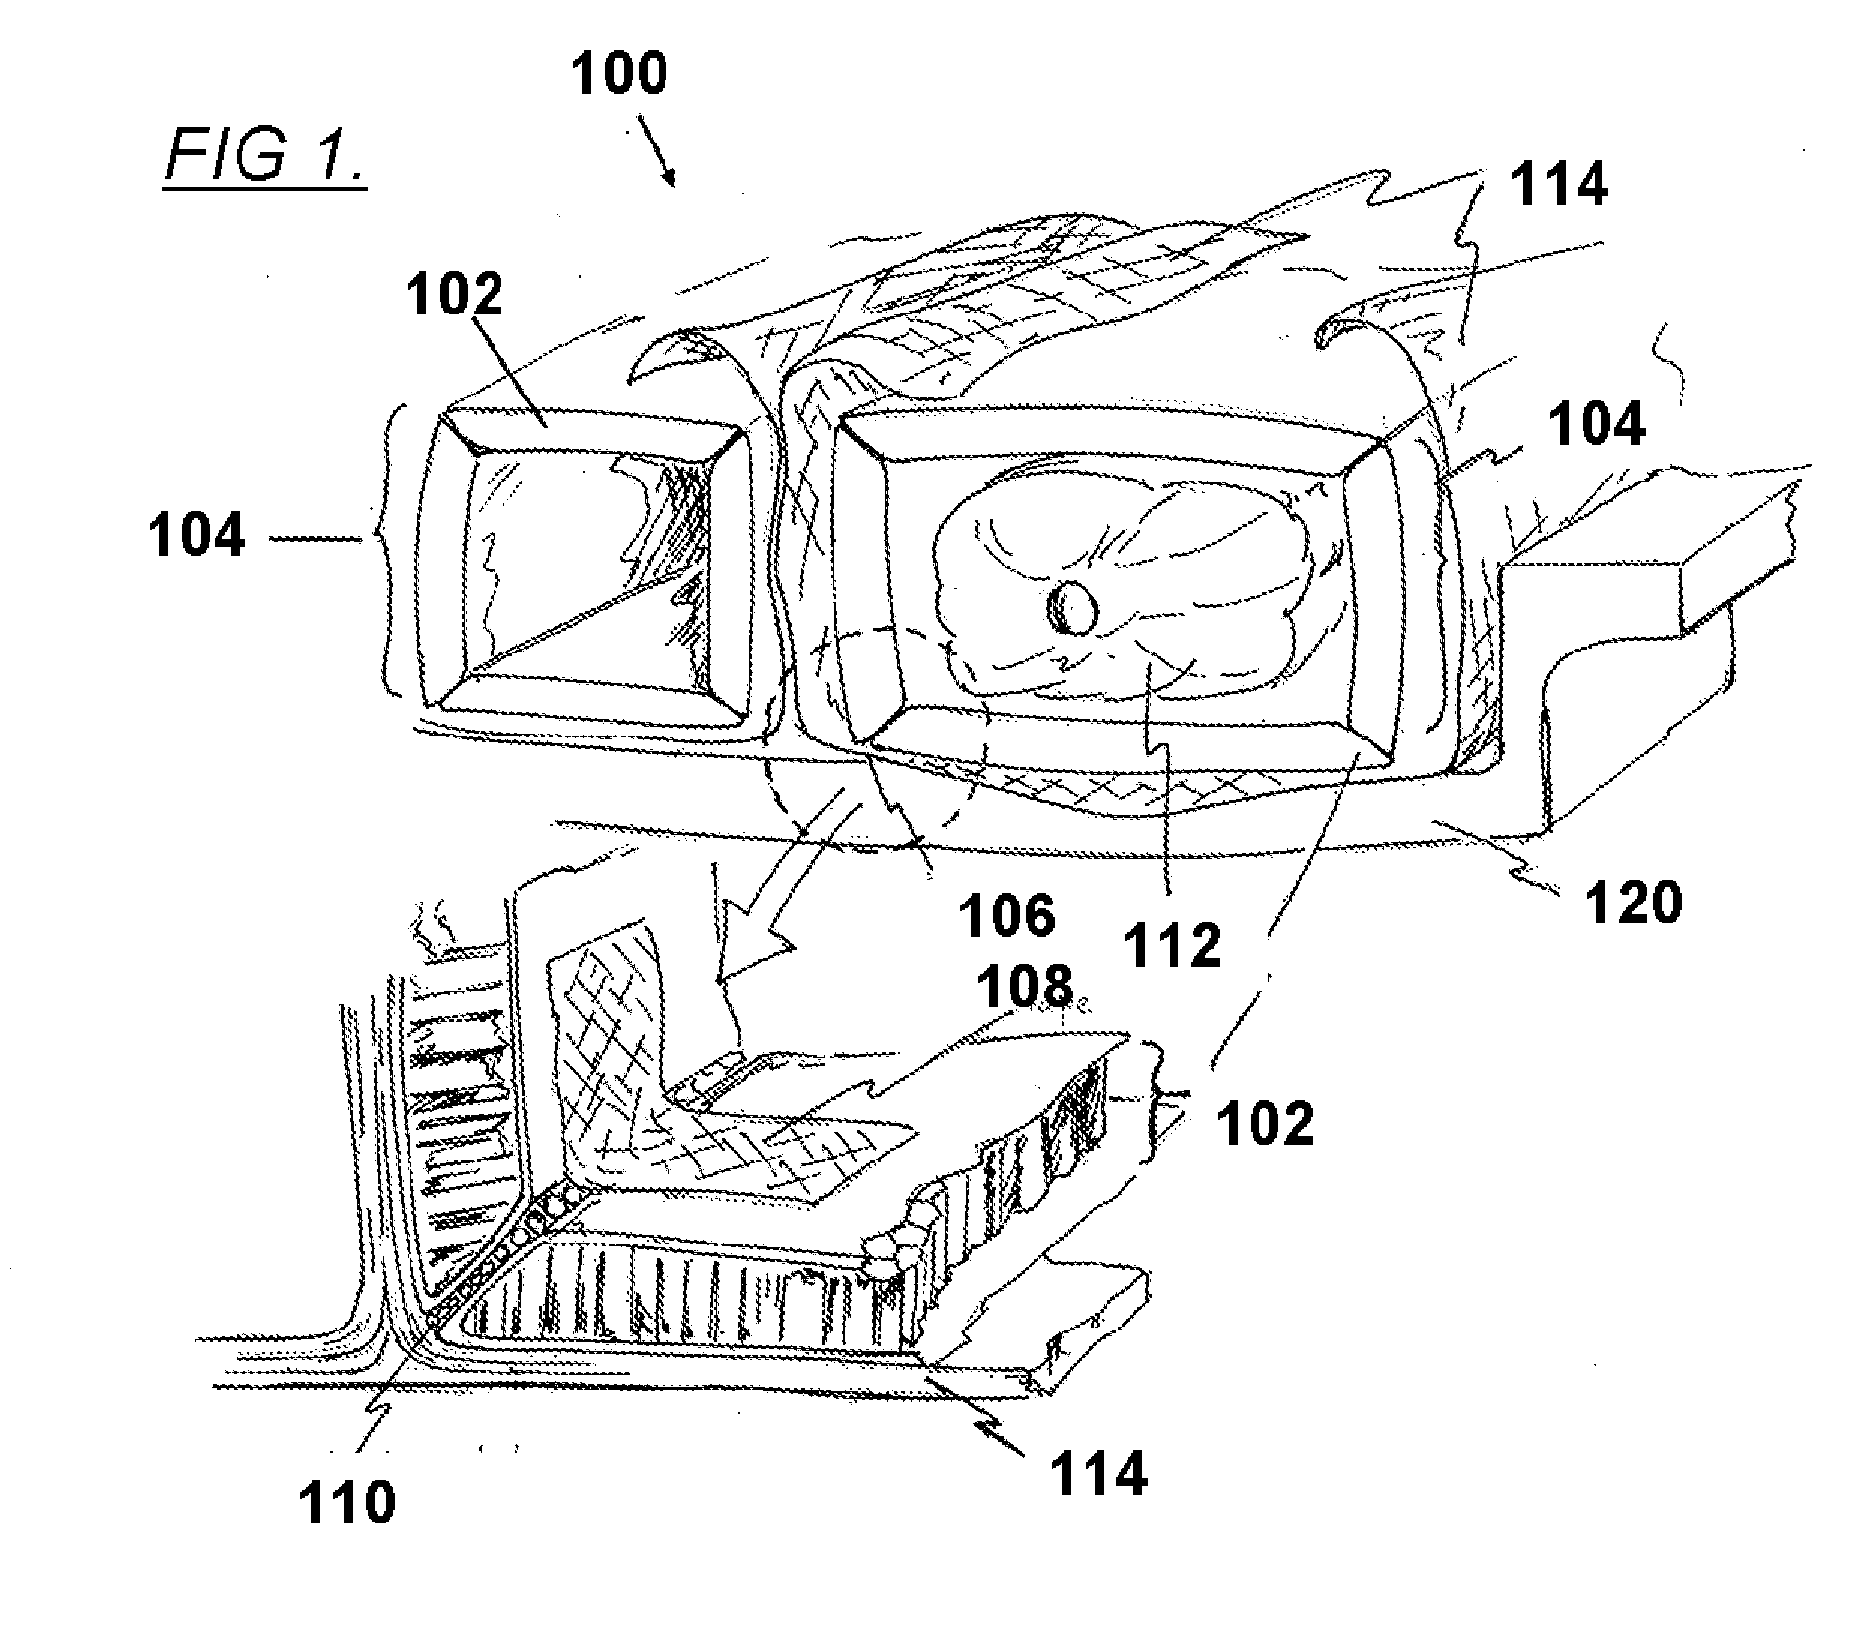 Self-Tooling Composite Structure